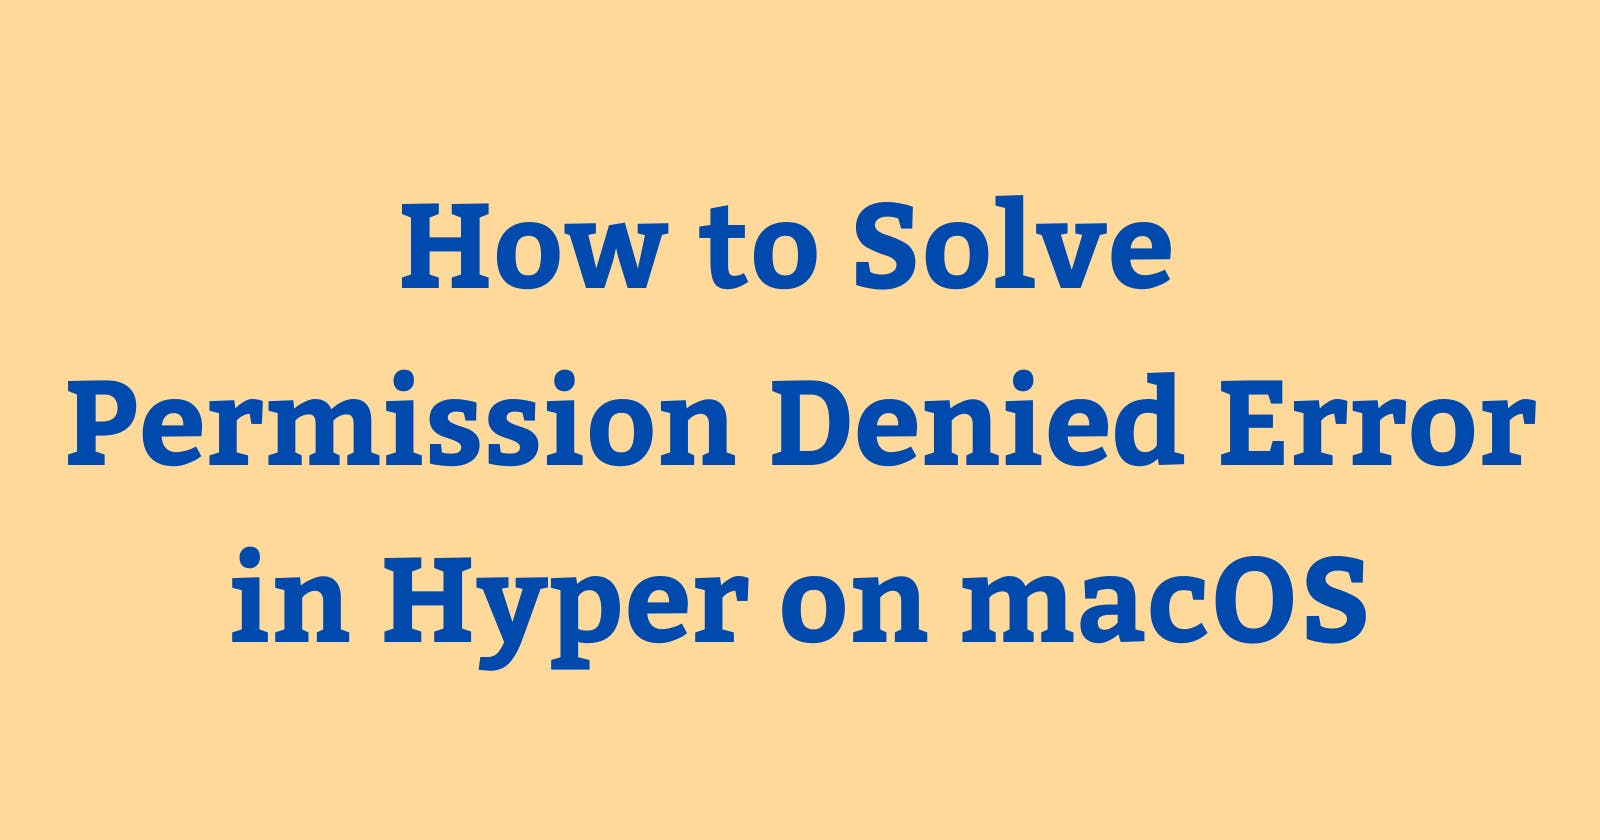 How to Solve Permission Denied Error in Hyper on macOS